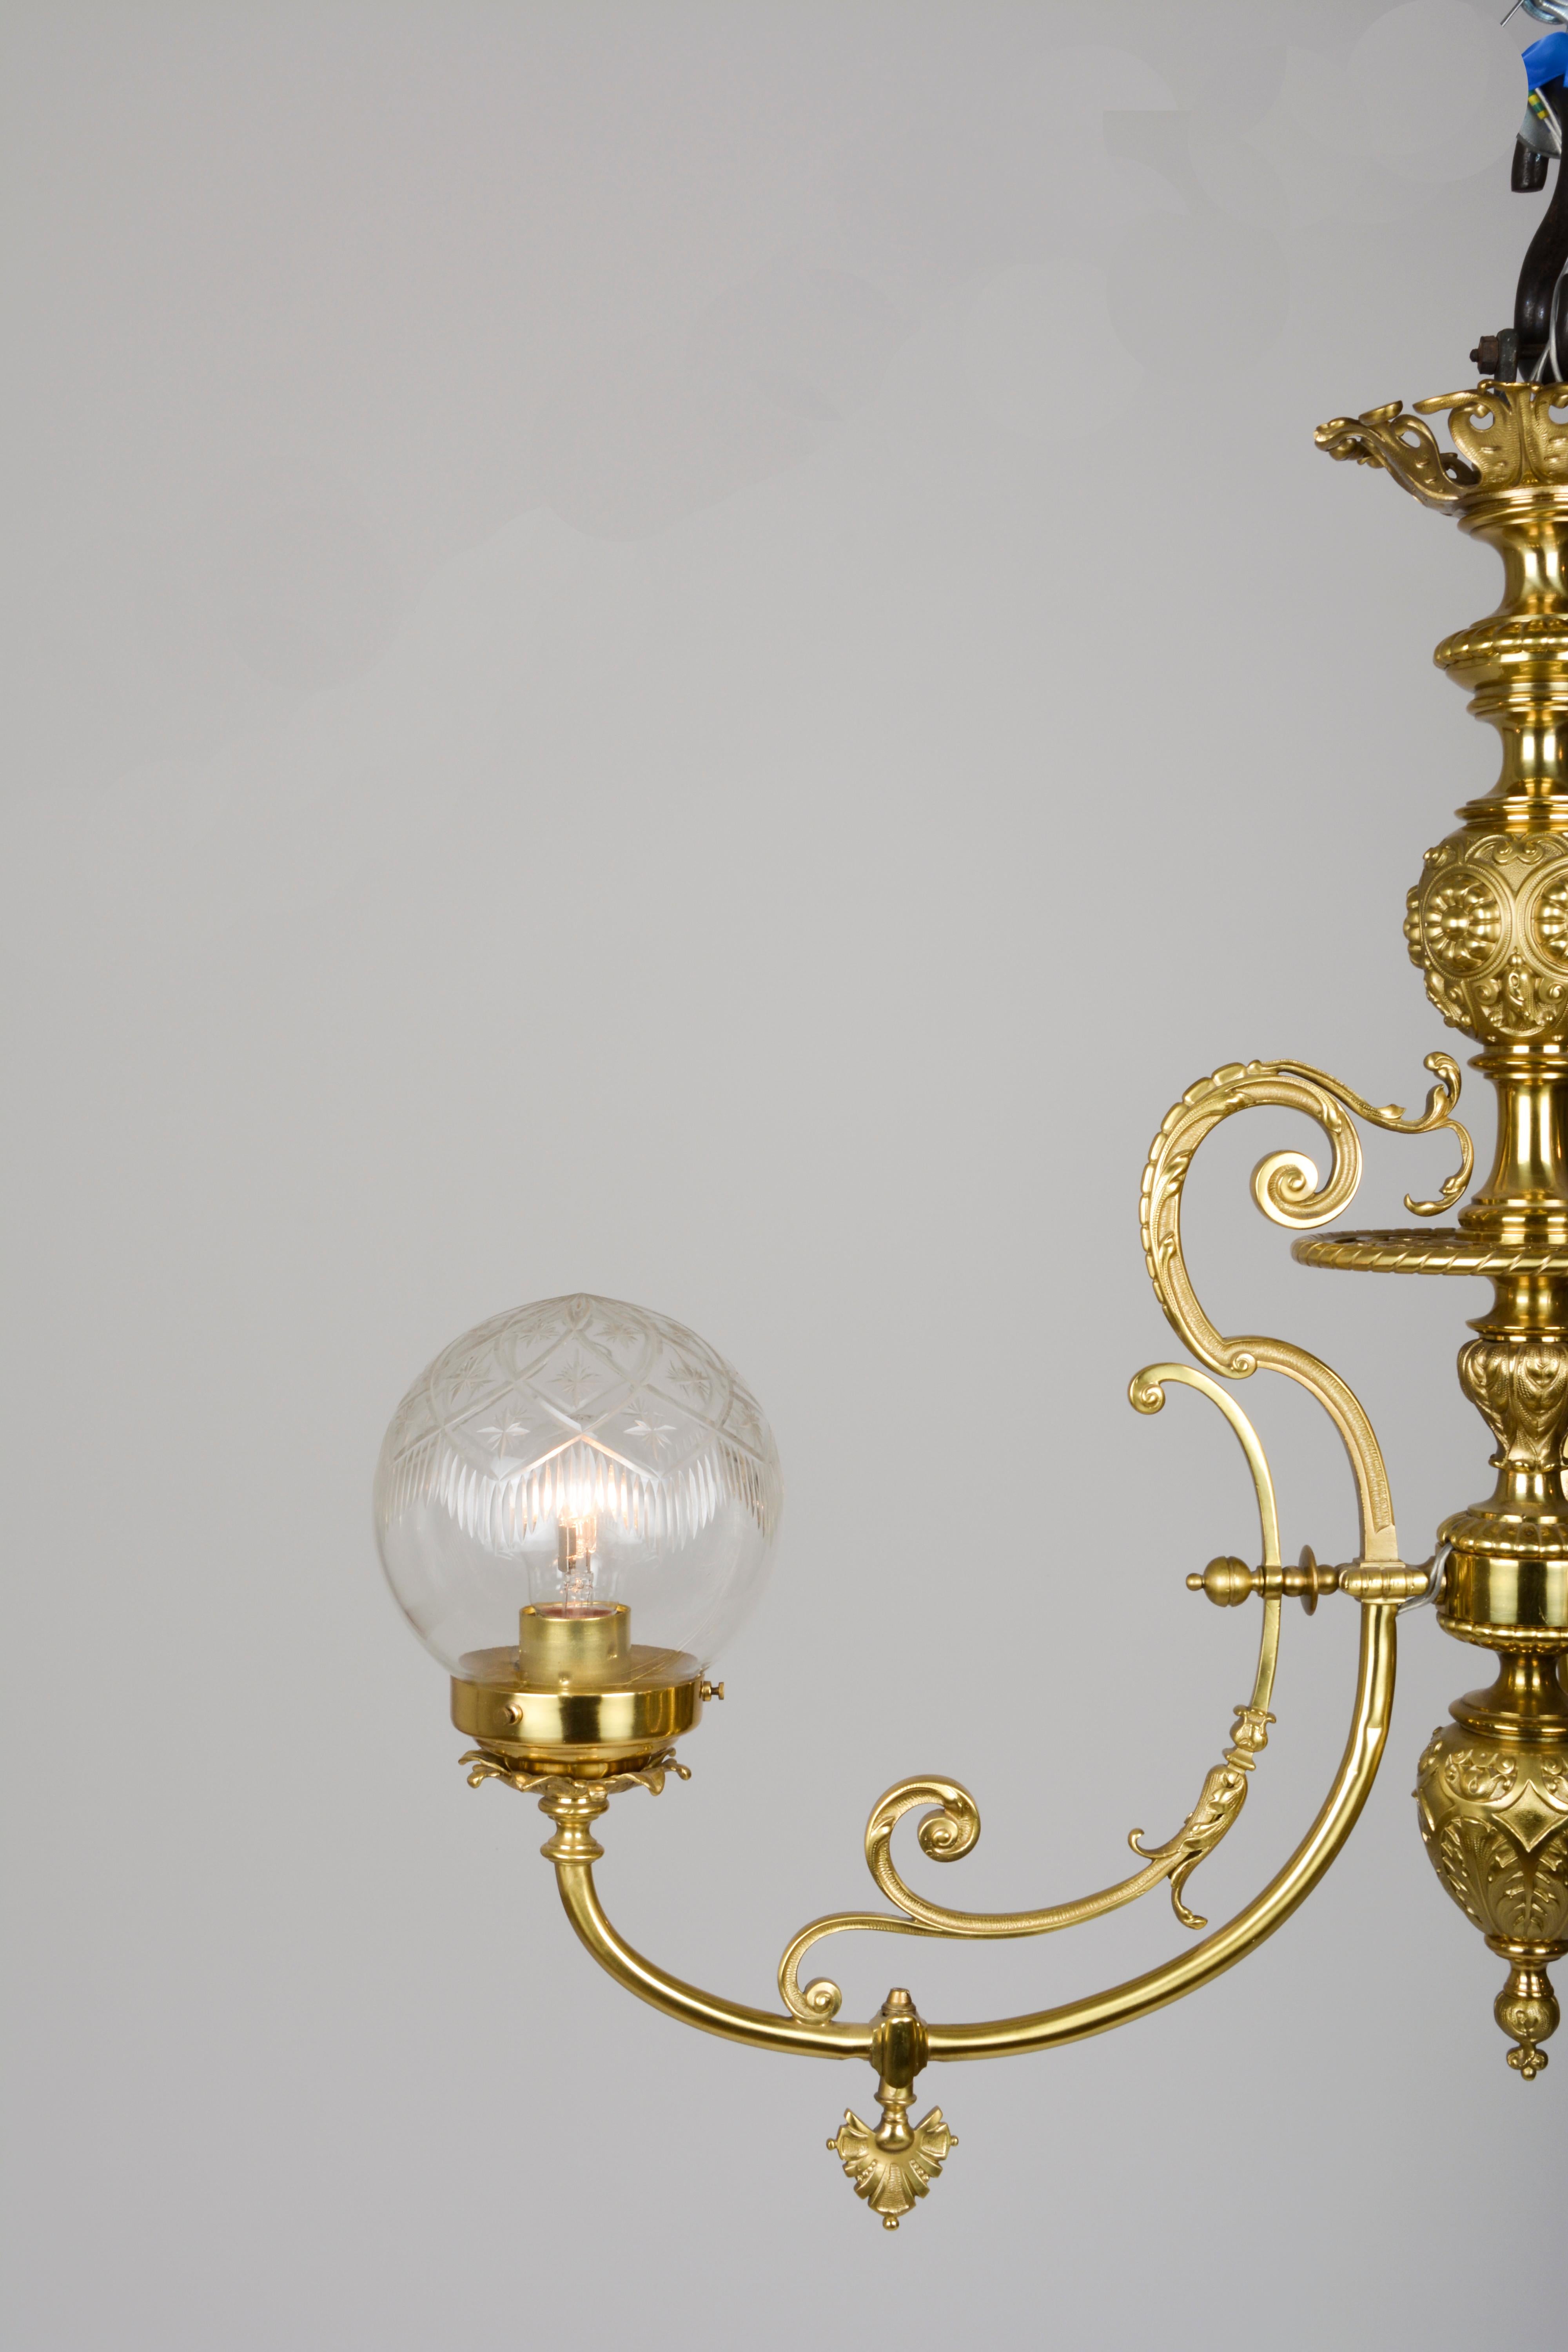 19th Century 3-Arm Electrified Gas Light Chandelier of Elaborately Cast Brass For Sale 5